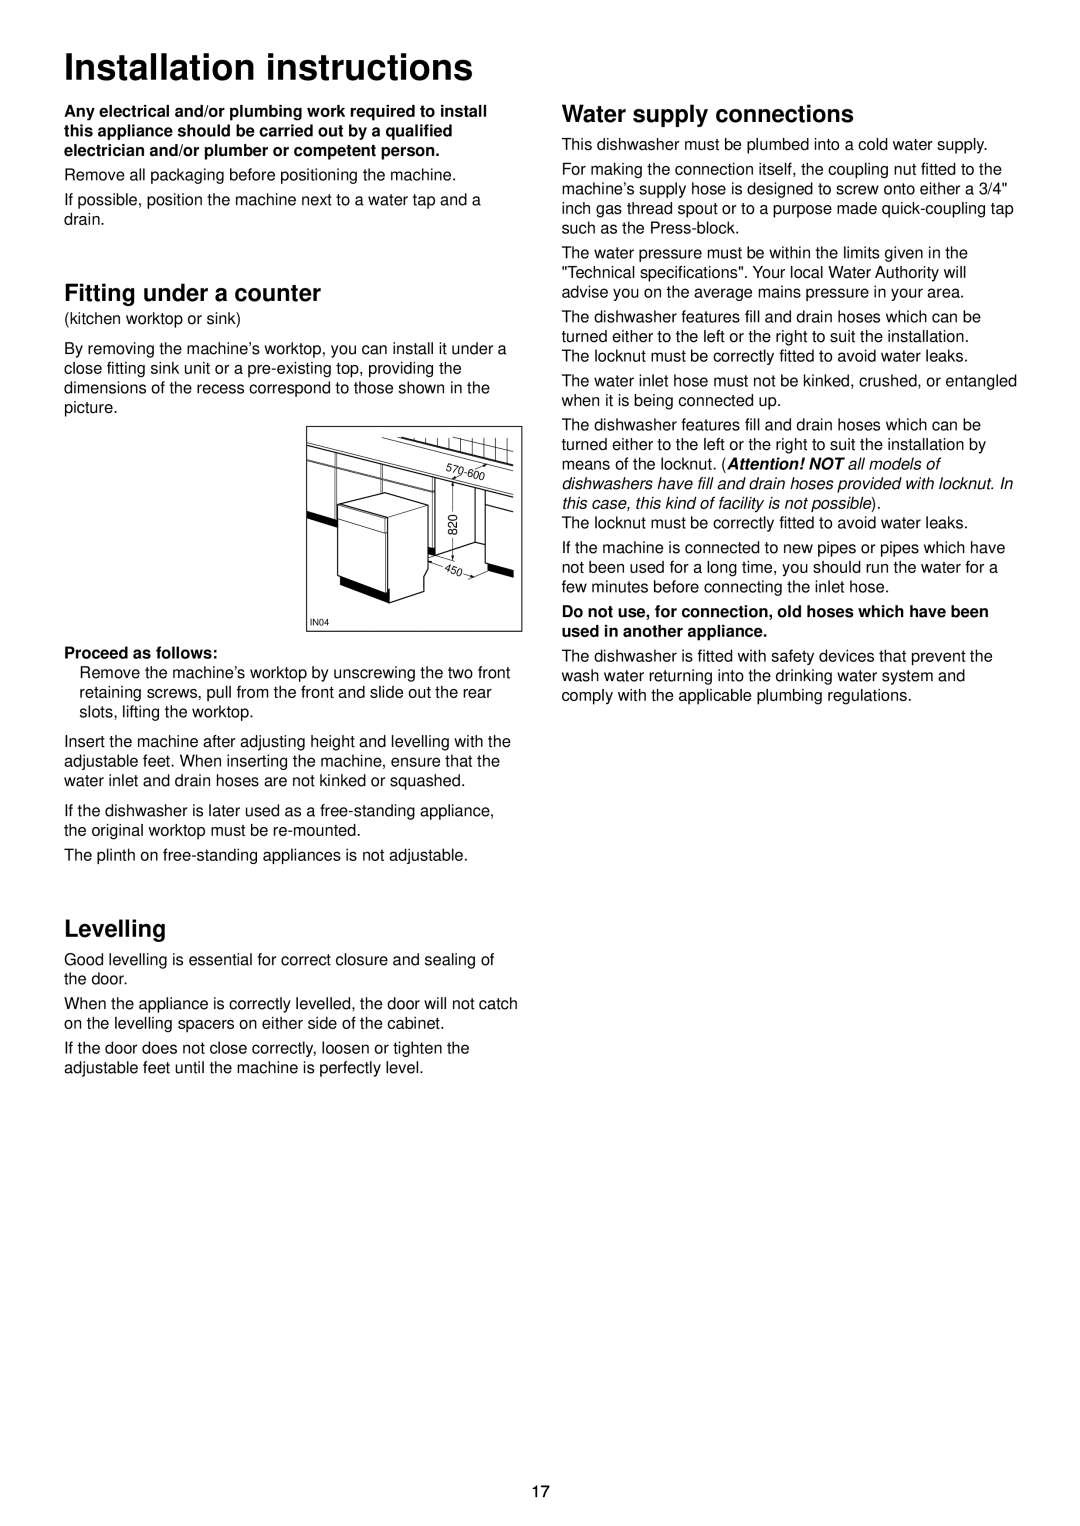 Zanussi DE 4554 S manual Installation instructions, Fitting under a counter, Levelling, Water supply connections 